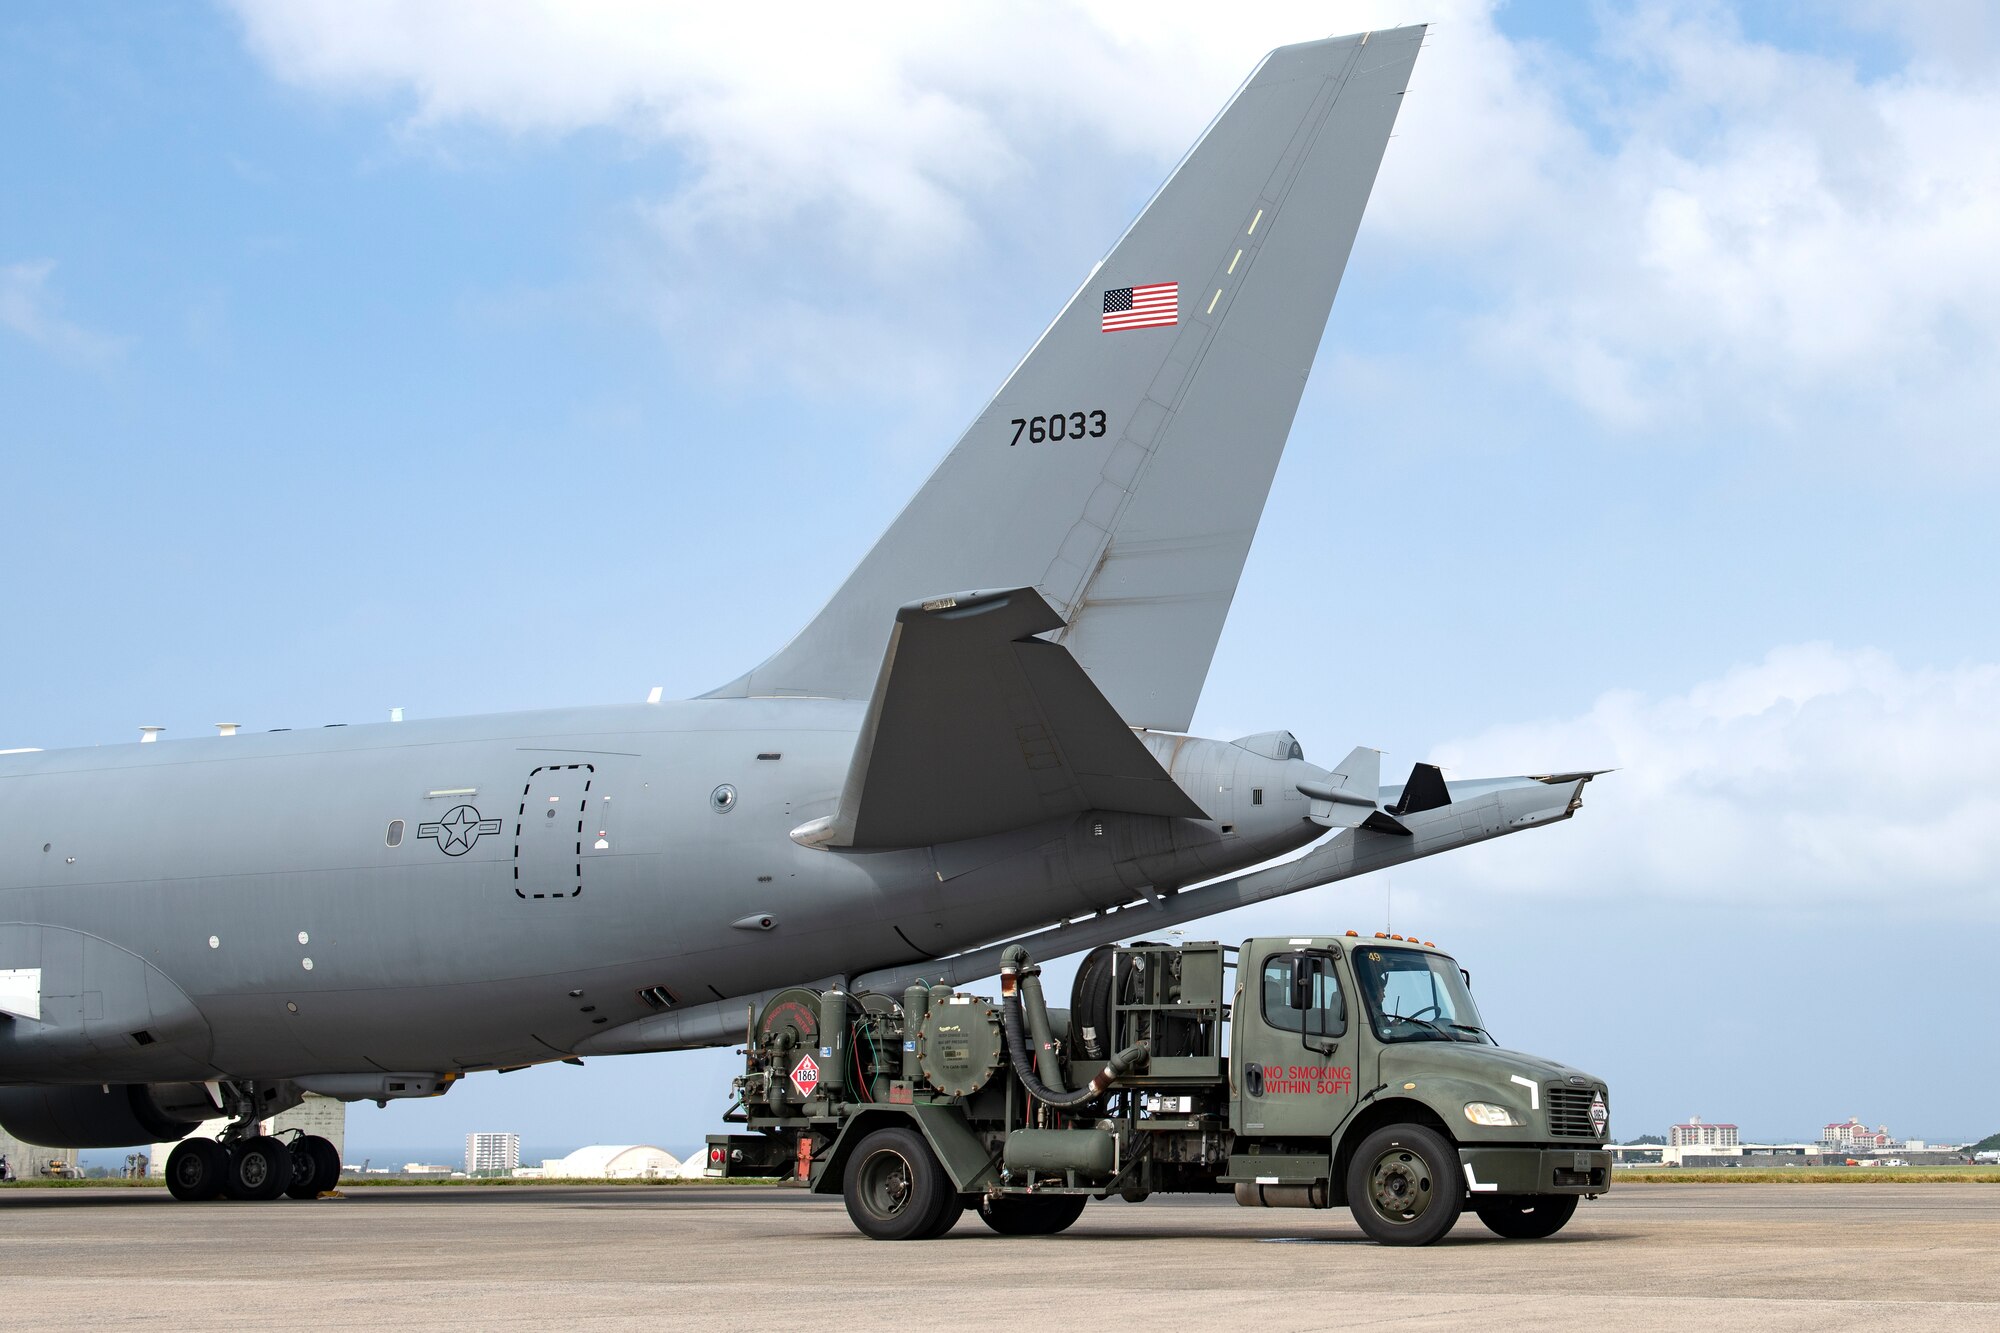 A KC-46A Pegasus from McConnell Air Force Base is parked alongside an R-12 refueling truck for hot pit refueling at Kadena Air Base, Japan, Oct. 13, 2022. Hot pit refueling is a technique used to reduce the ground time between flights as well as manpower and equipment requirements. (U.S. Air Force photo by Senior Airman Jessi Roth)